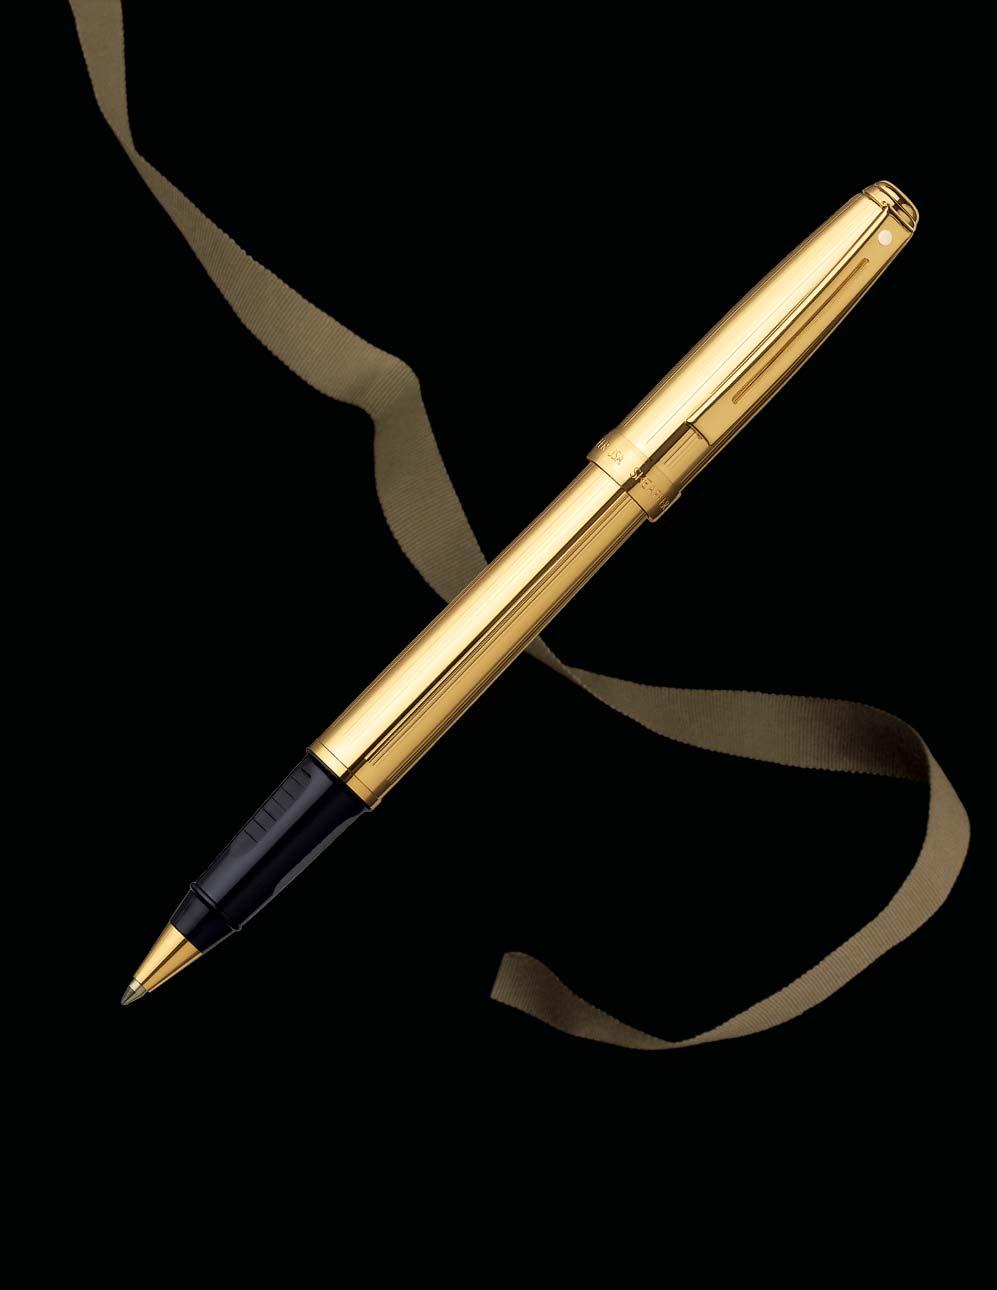 340 342 346 368 371 373 9052 9053 9133 Classic Sophistication The Prelude Collection of writing instruments is a masterful blend of timeless design and modern functionality.